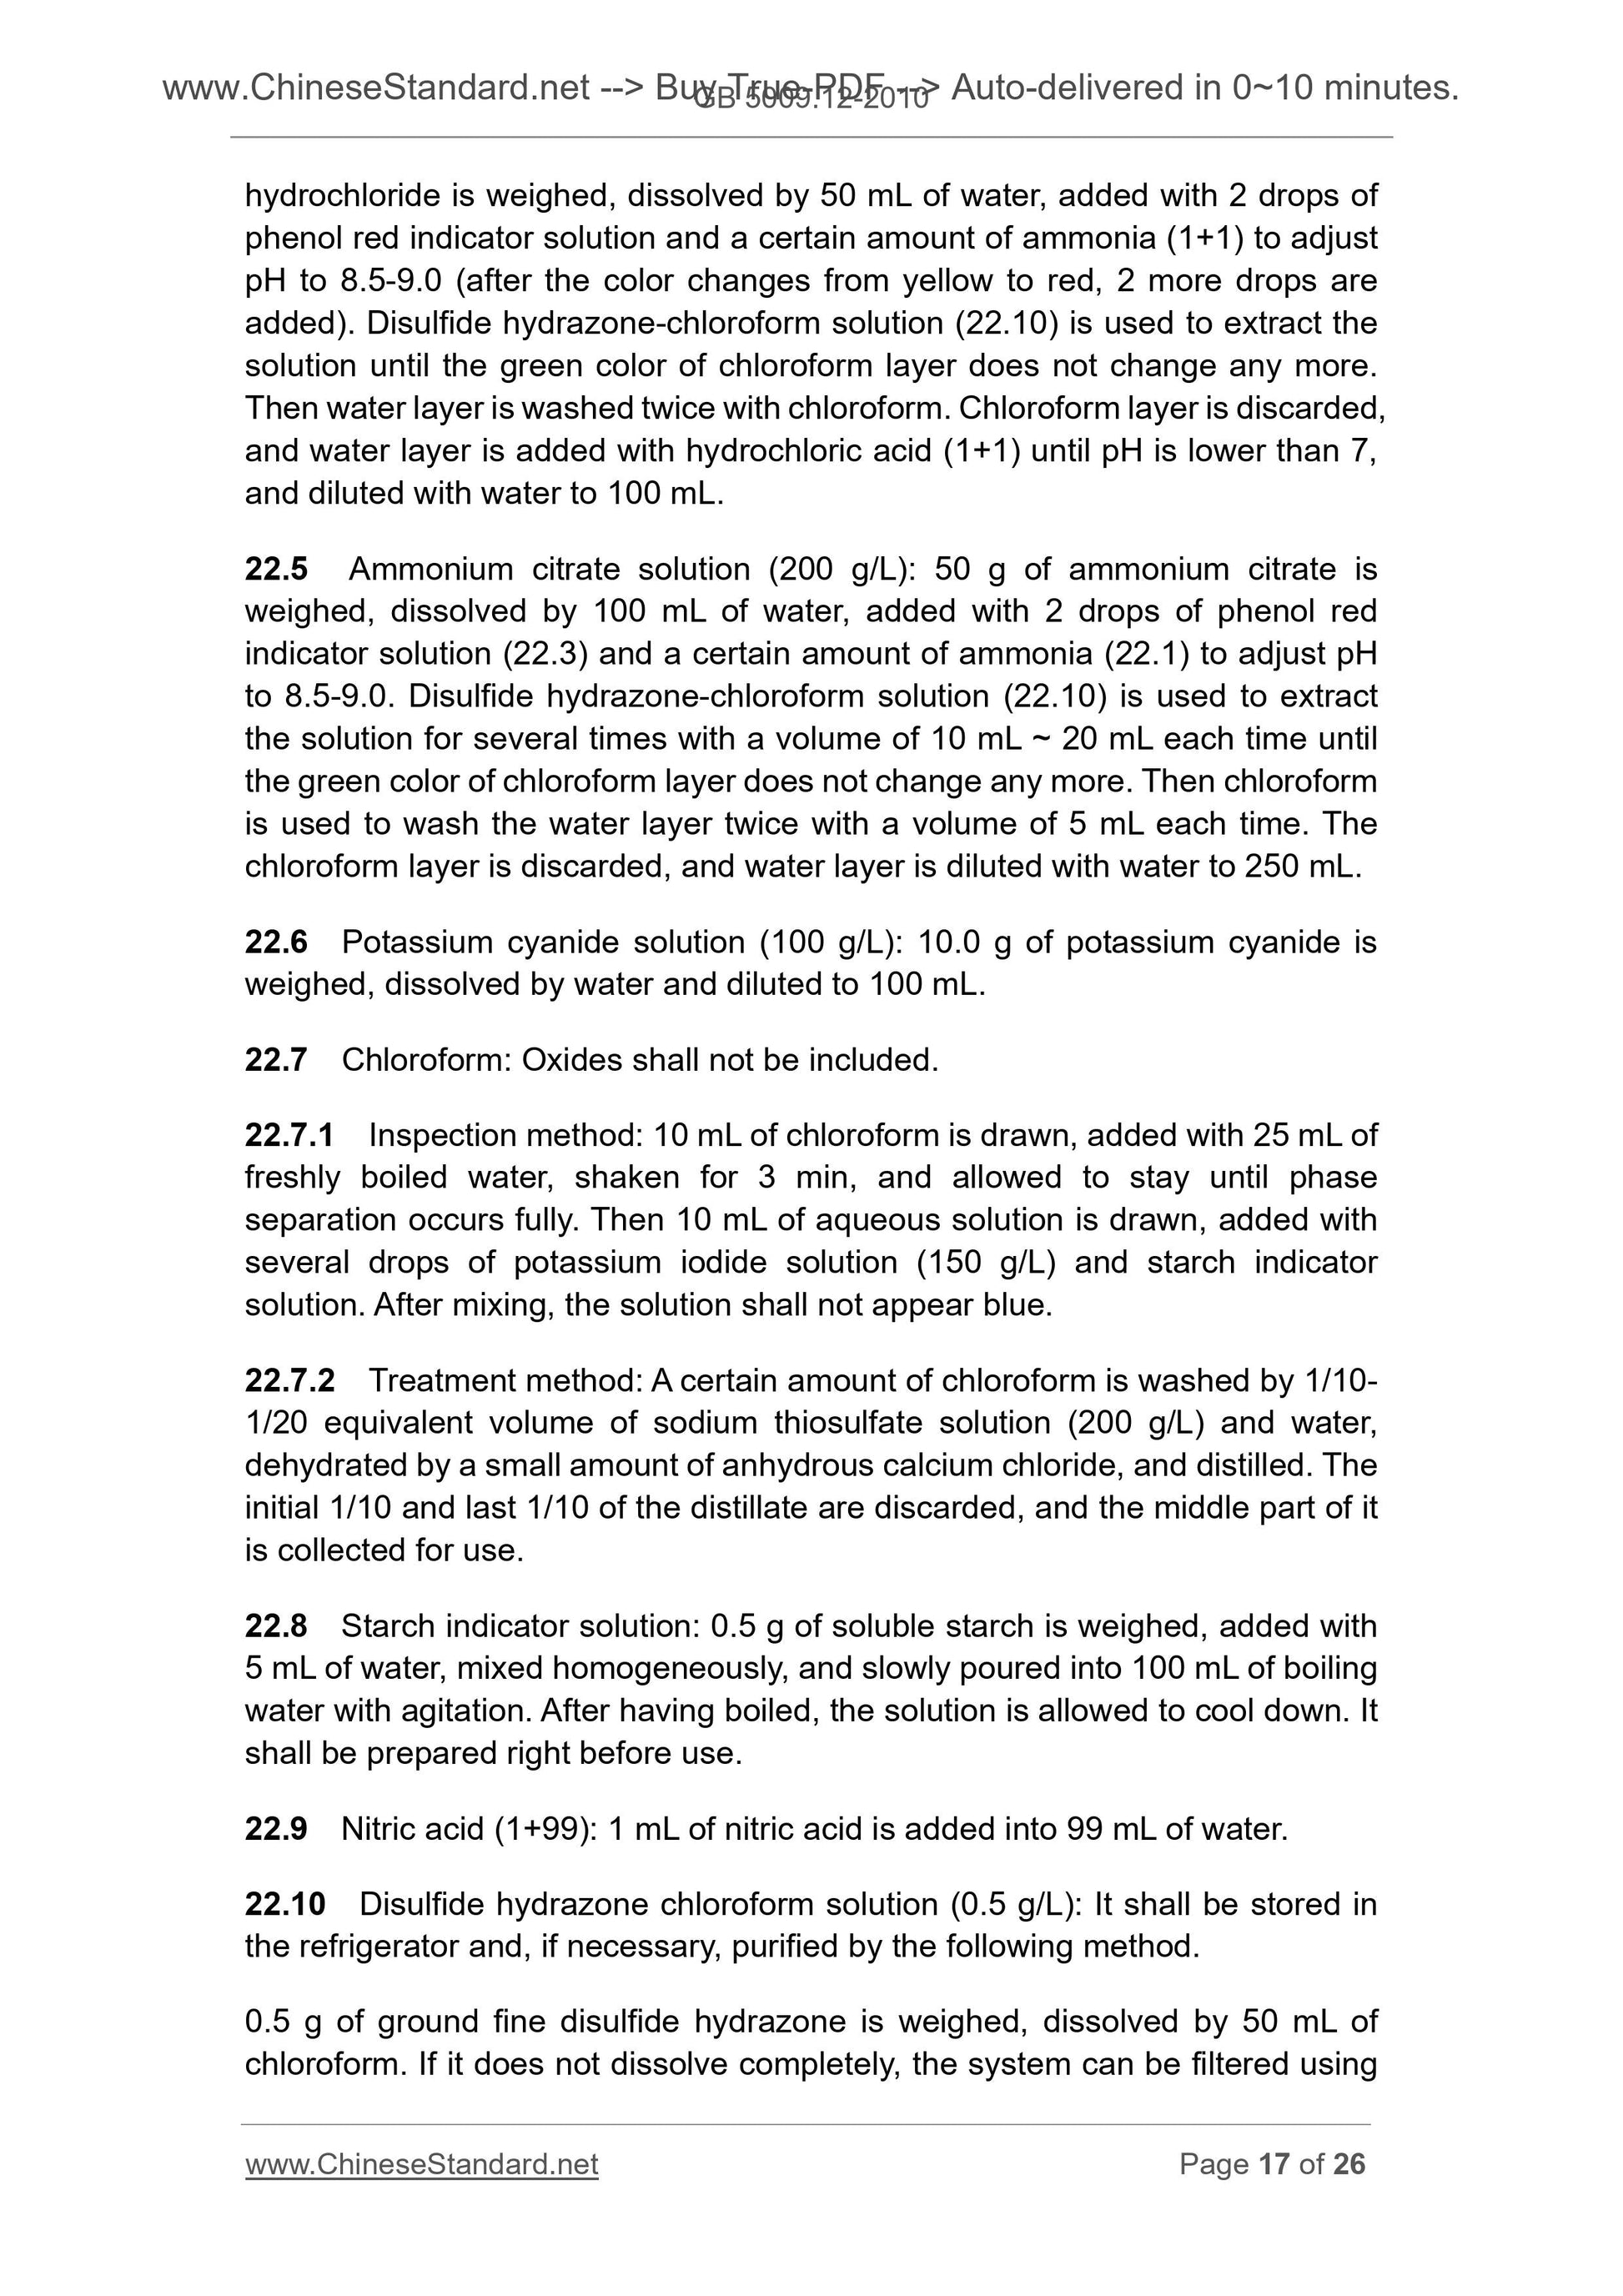 GB 5009.12-2010 Page 10